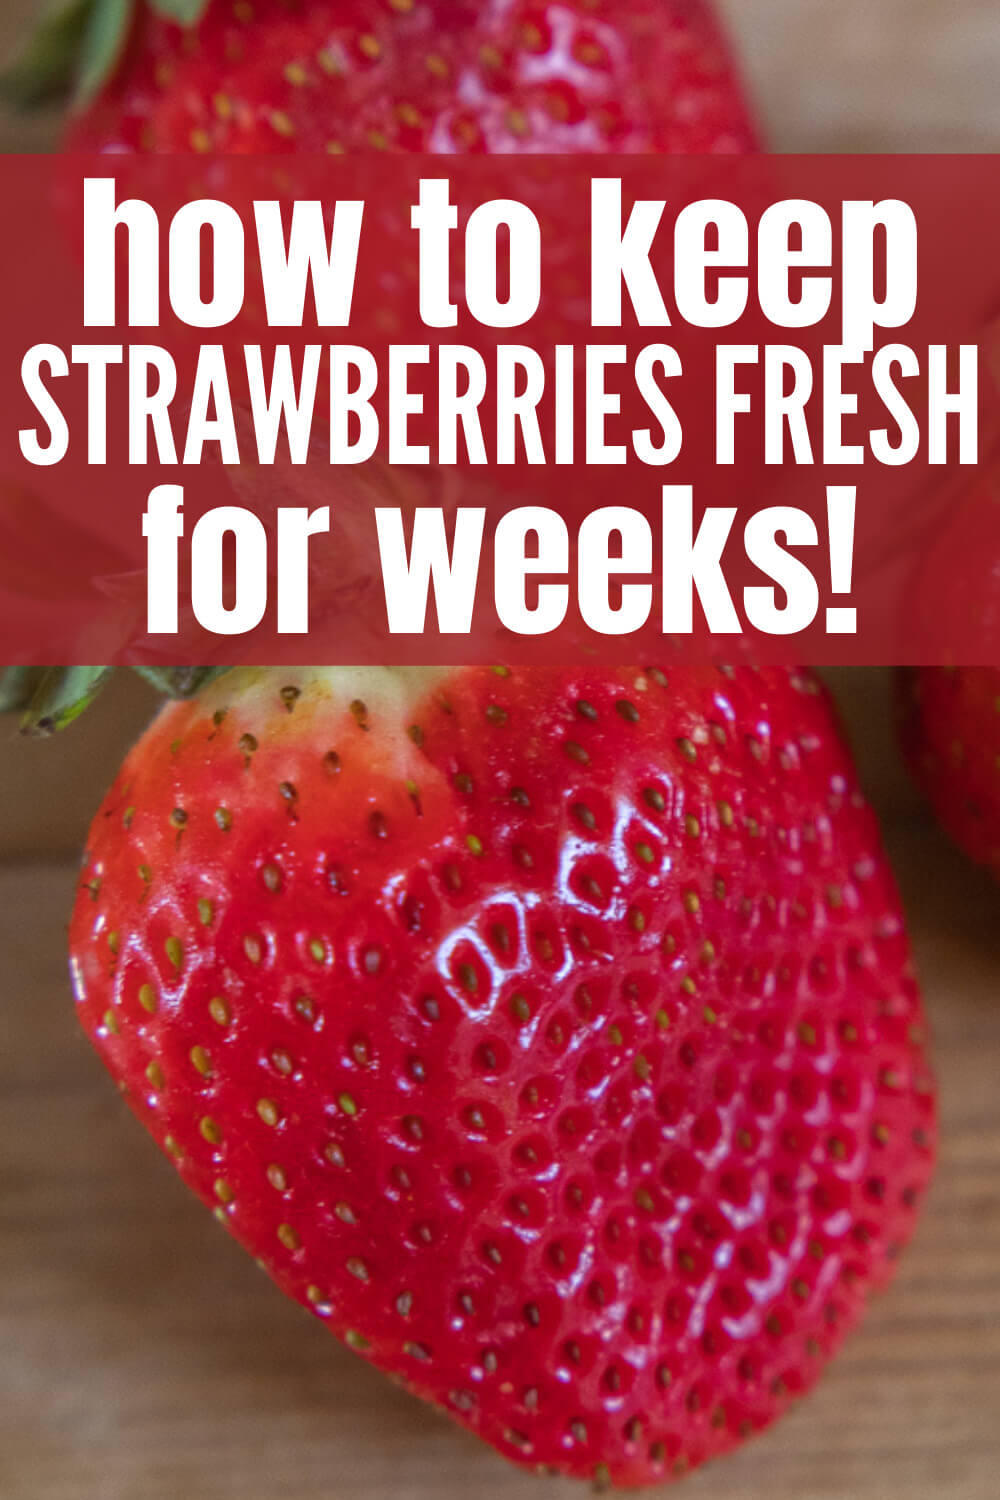 How to keep strawberries fresh for weeks!  These simple steps can change the way you keep these most delicate berries.  I have found mine to last up to three weeks instead of merely just a couple days.  Save money and get to enjoy all those strawberries you bought!